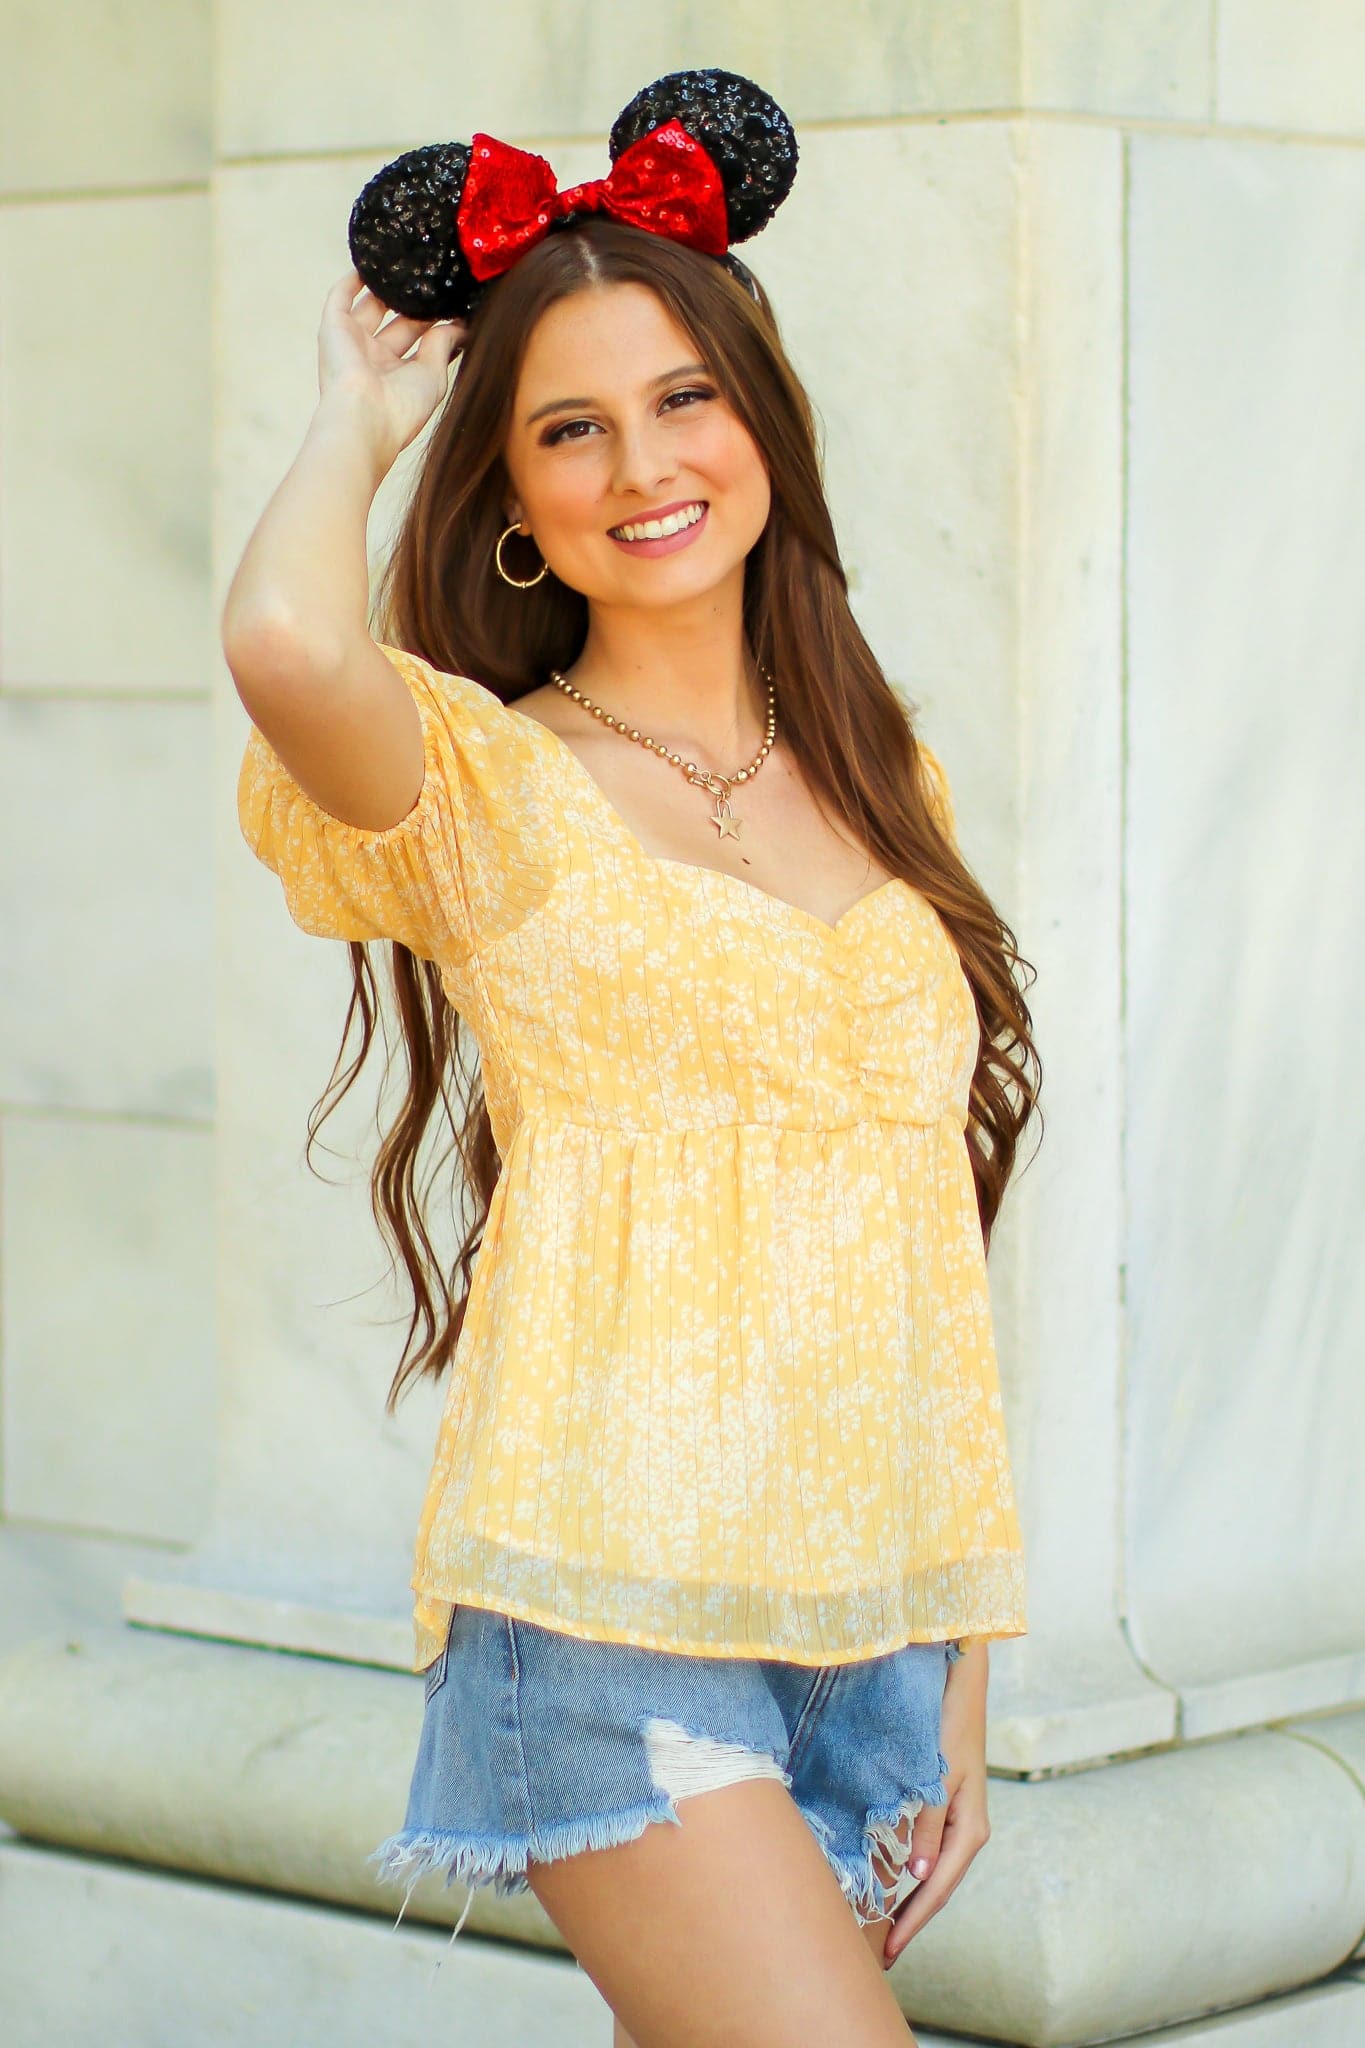  Tilien Floral Babydoll Top - FINAL SALE - Madison and Mallory